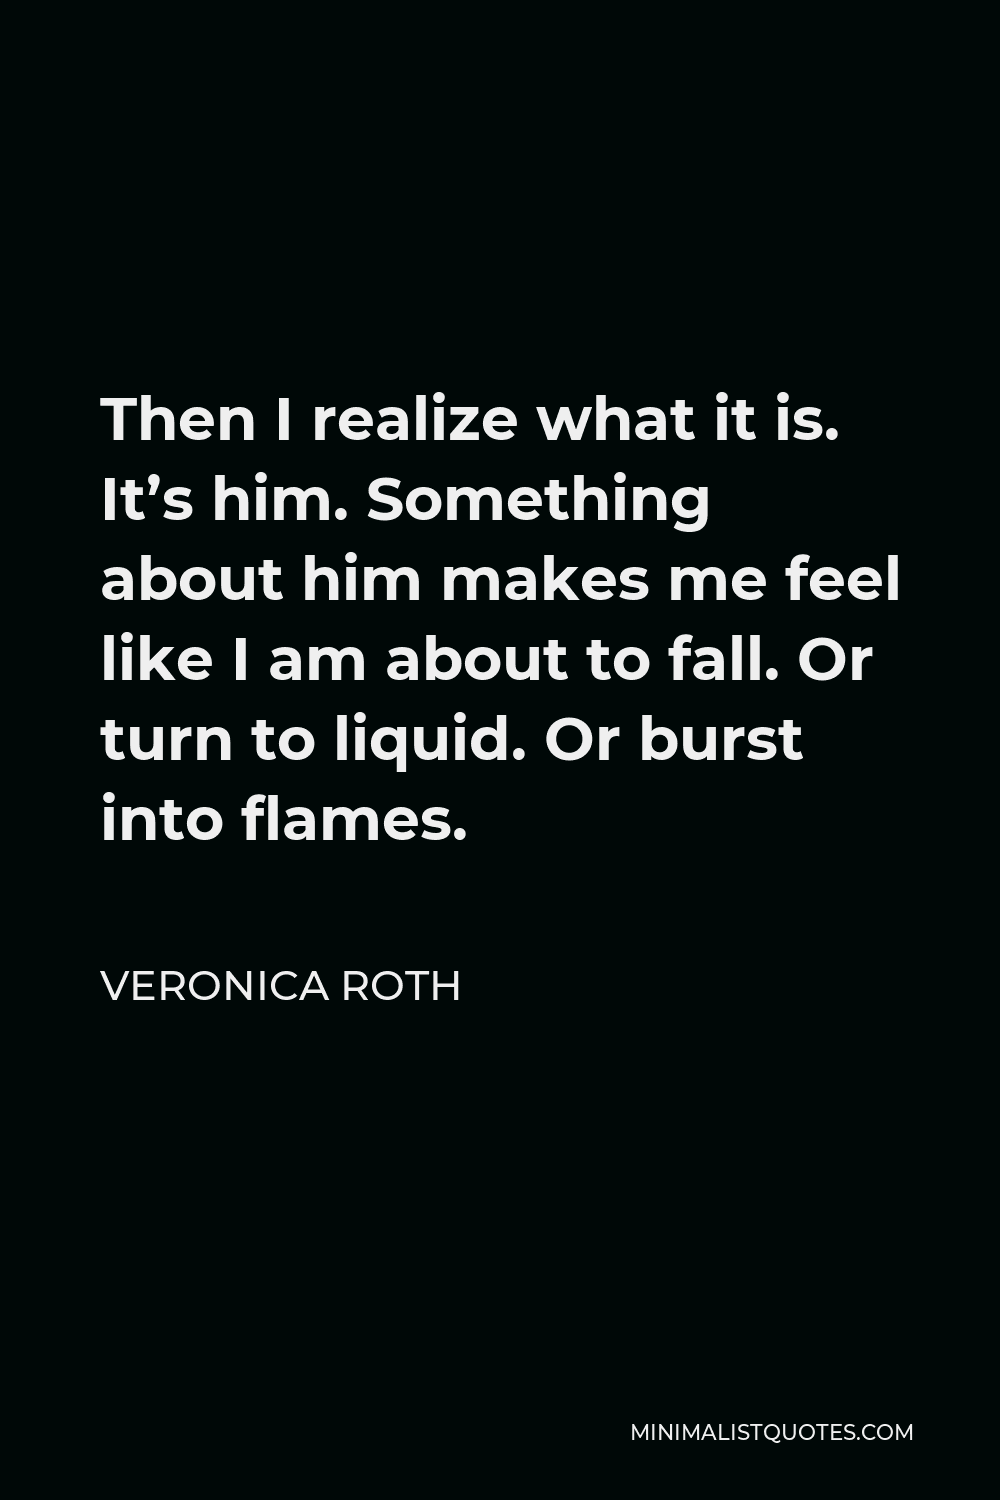 Veronica Roth Quote - Then I realize what it is. It’s him. Something about him makes me feel like I am about to fall. Or turn to liquid. Or burst into flames.